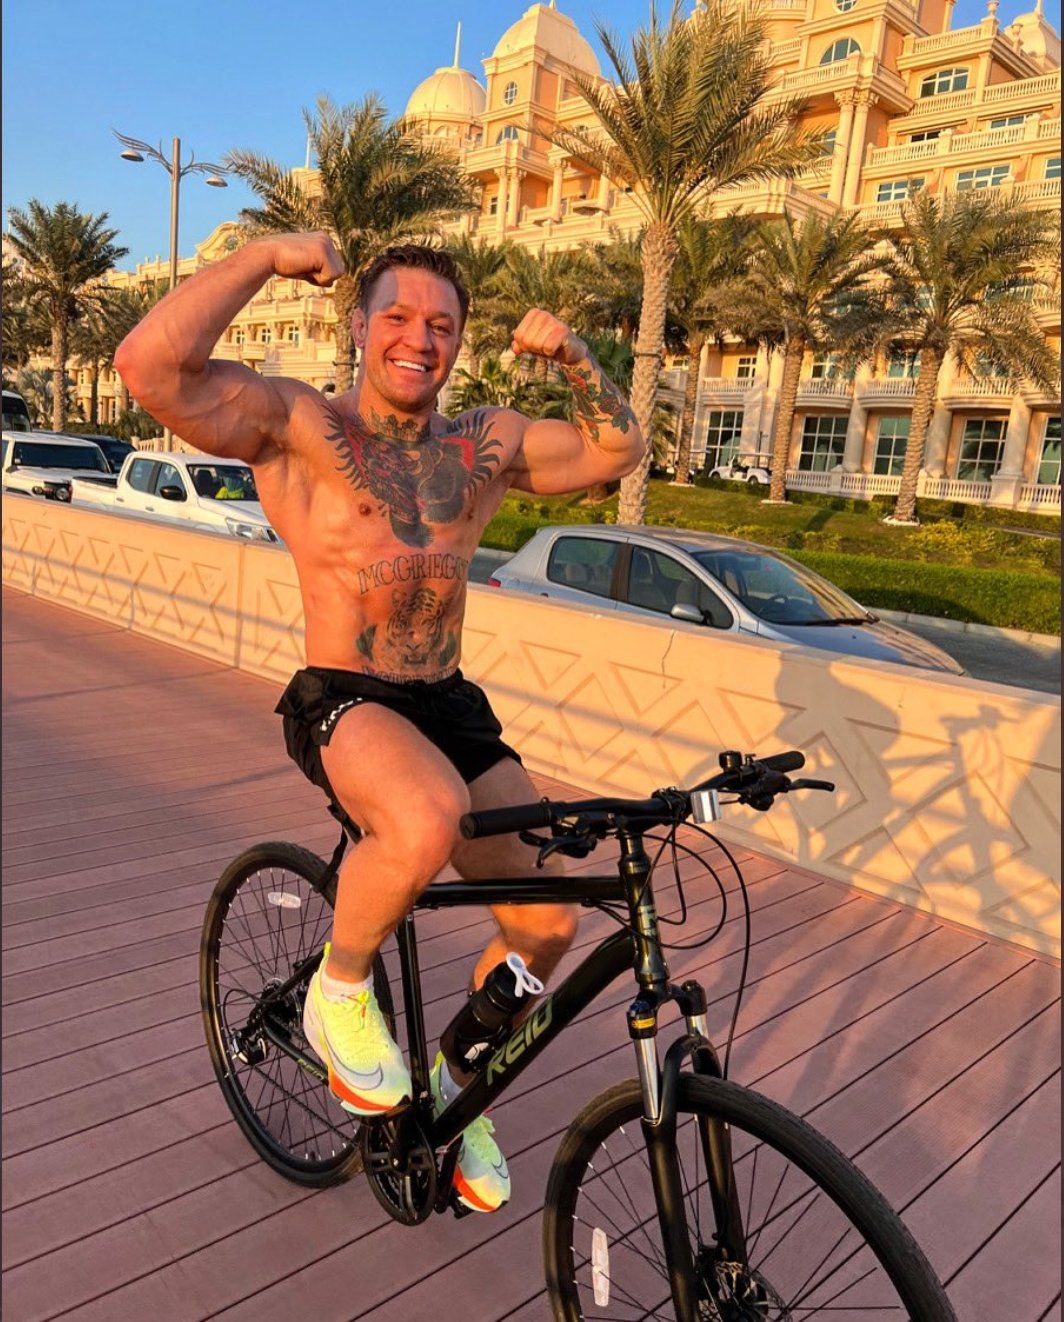 UFC: Conor McGregor's bicep transformation clearly highlighted in two photos